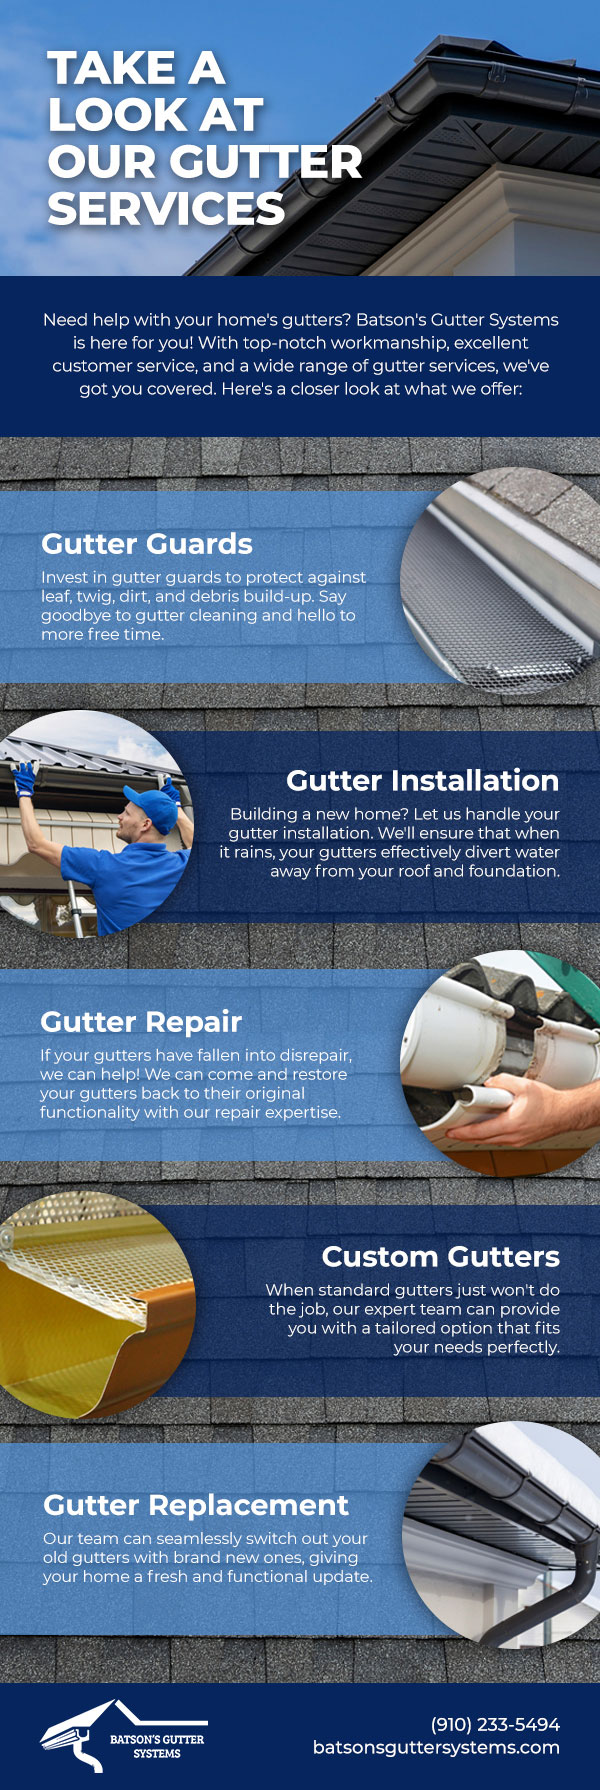 A Quick Look at Our Gutter Services